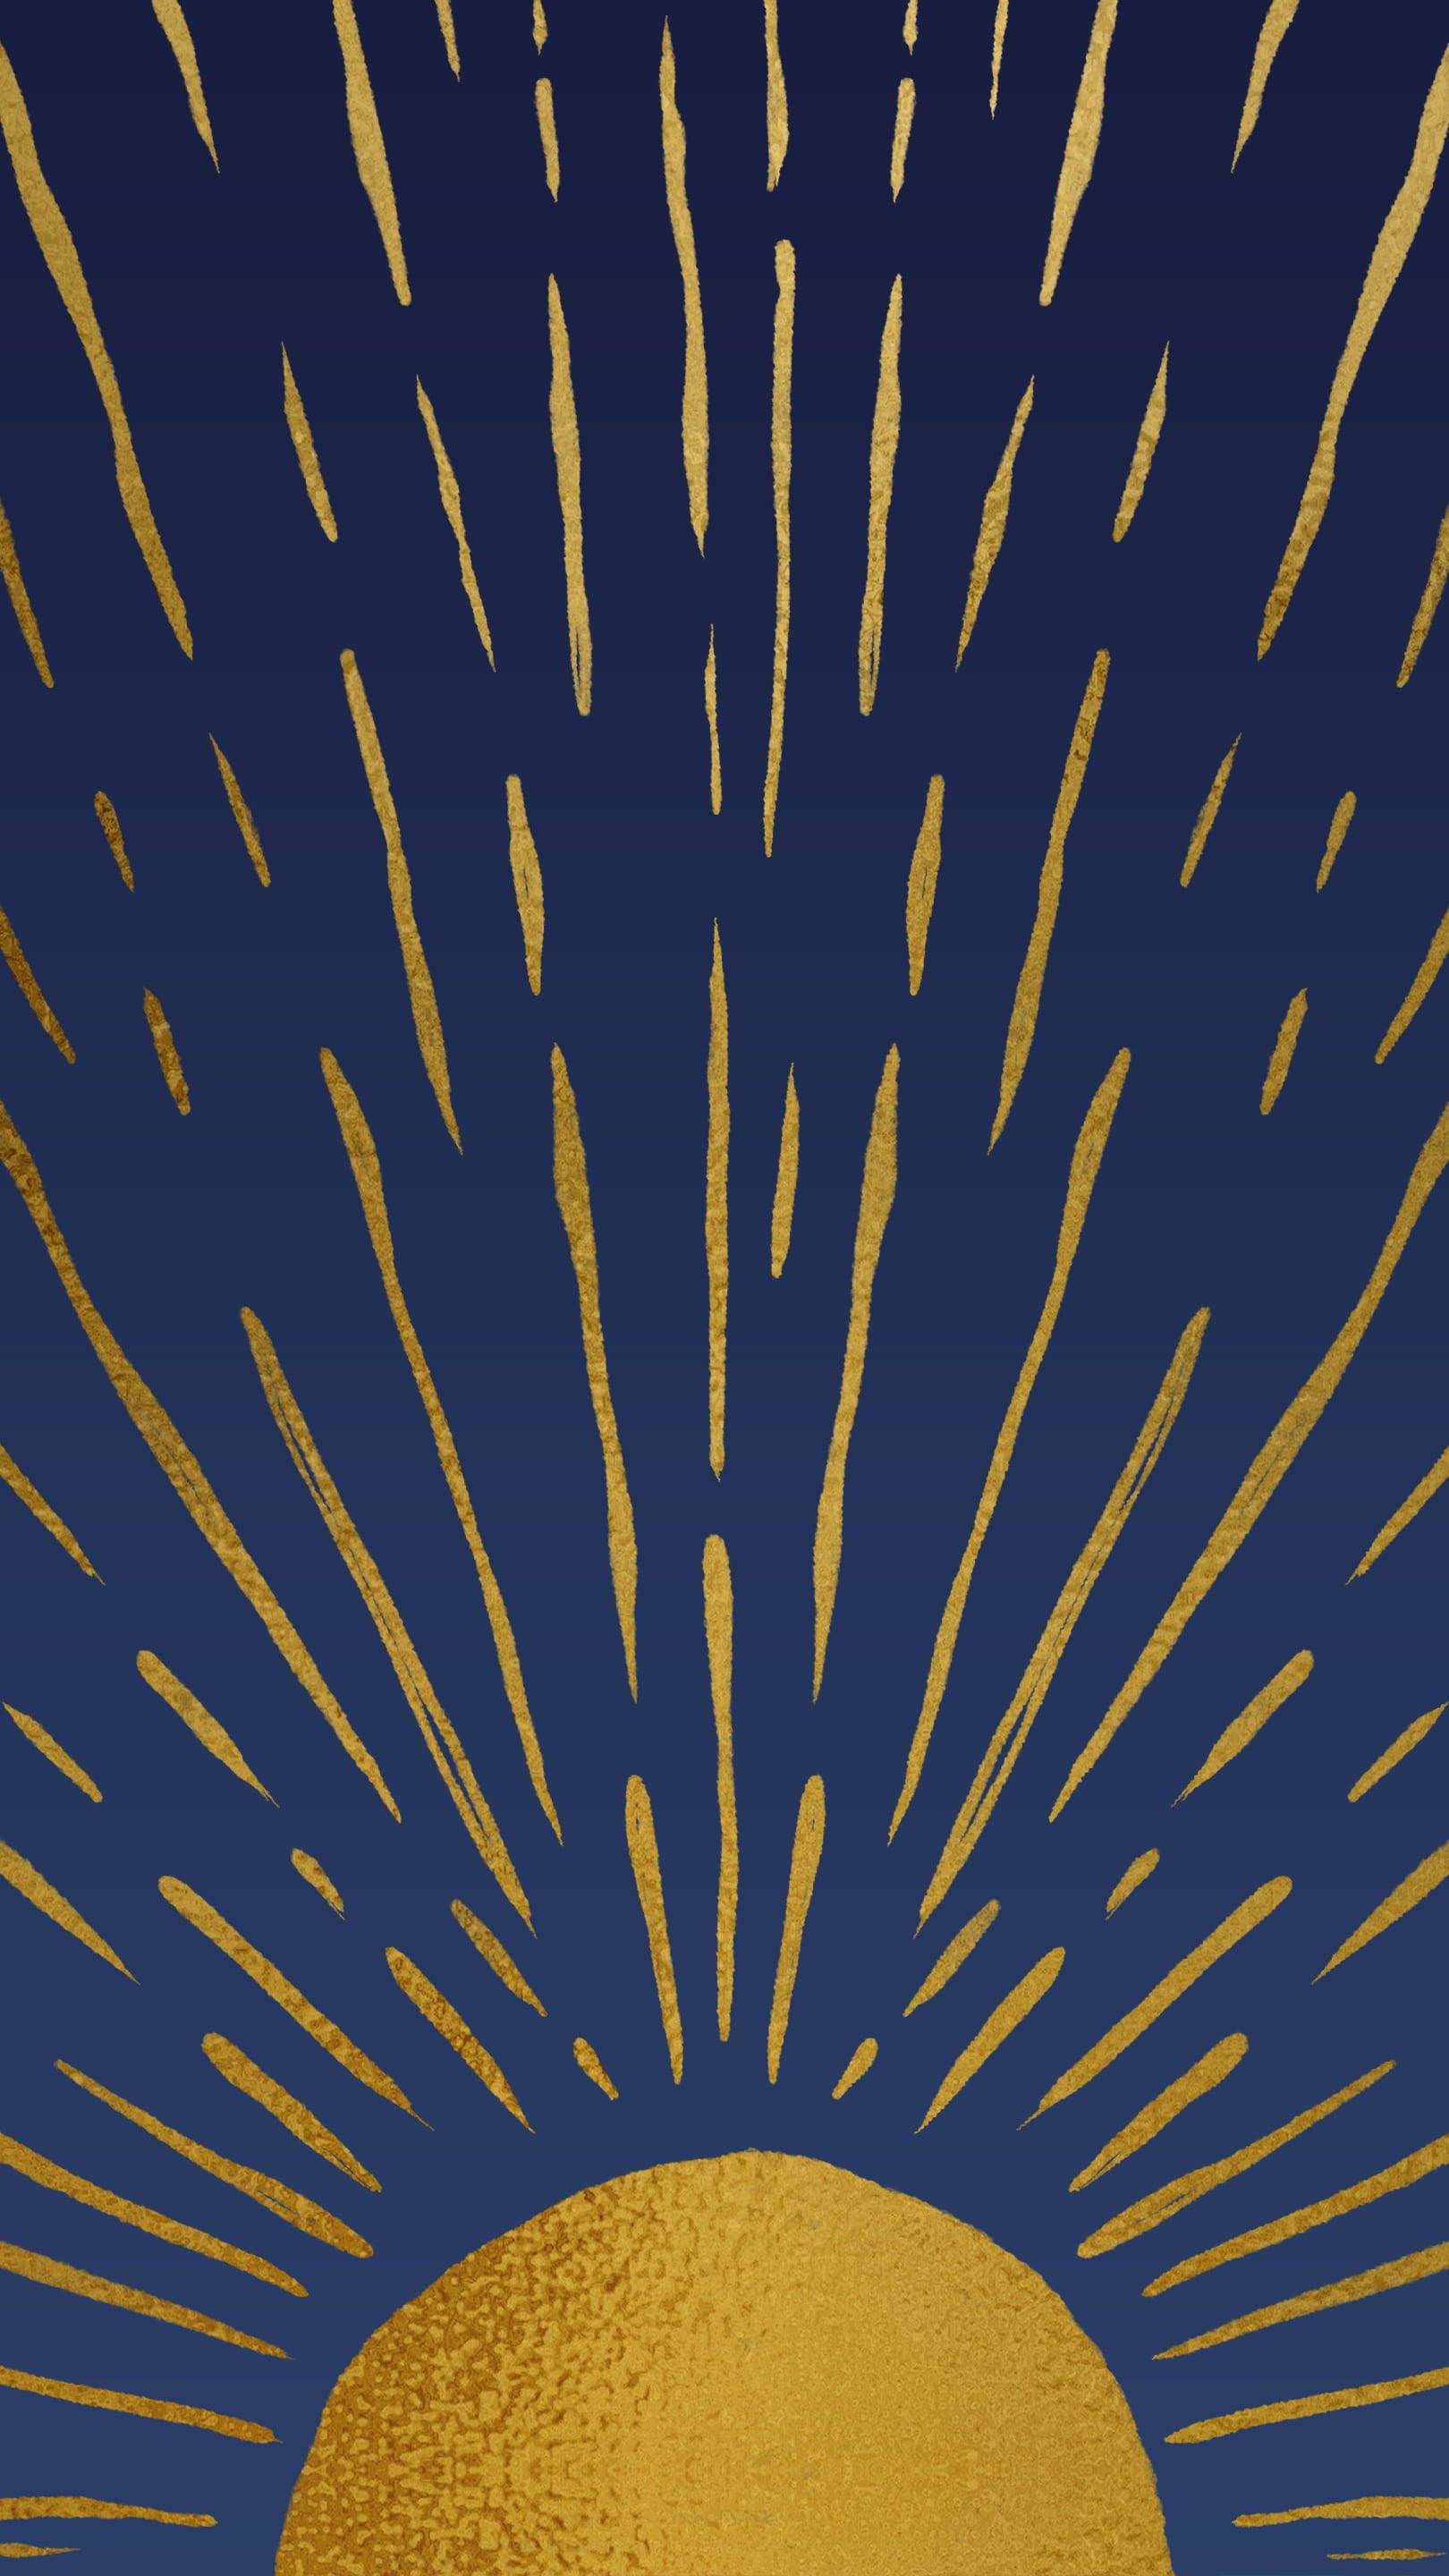 A poster of the sun with gold stars - Sun